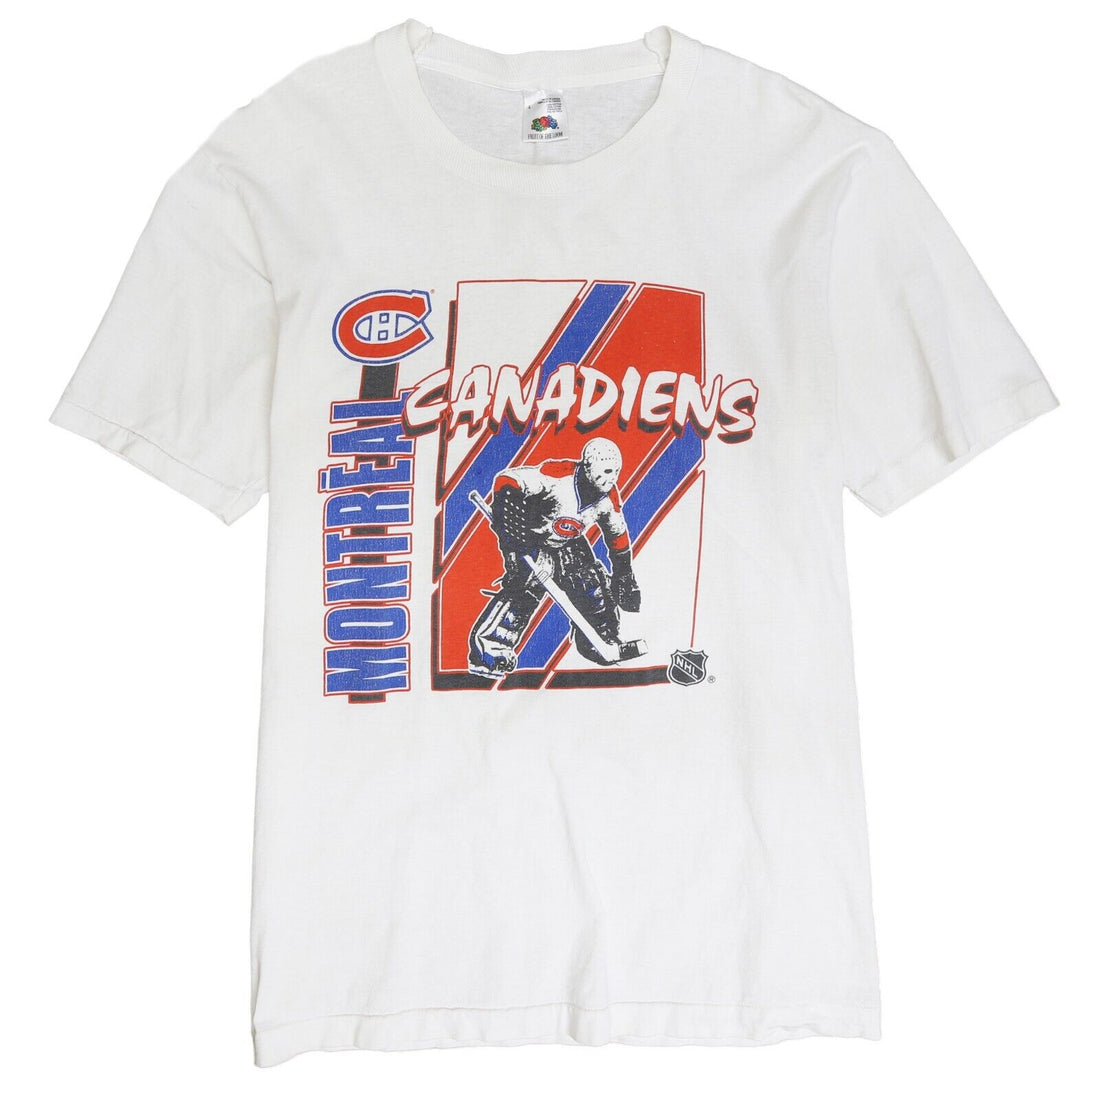 Vintage Montreal Canadiens T-Shirt Size Large 90s NHL